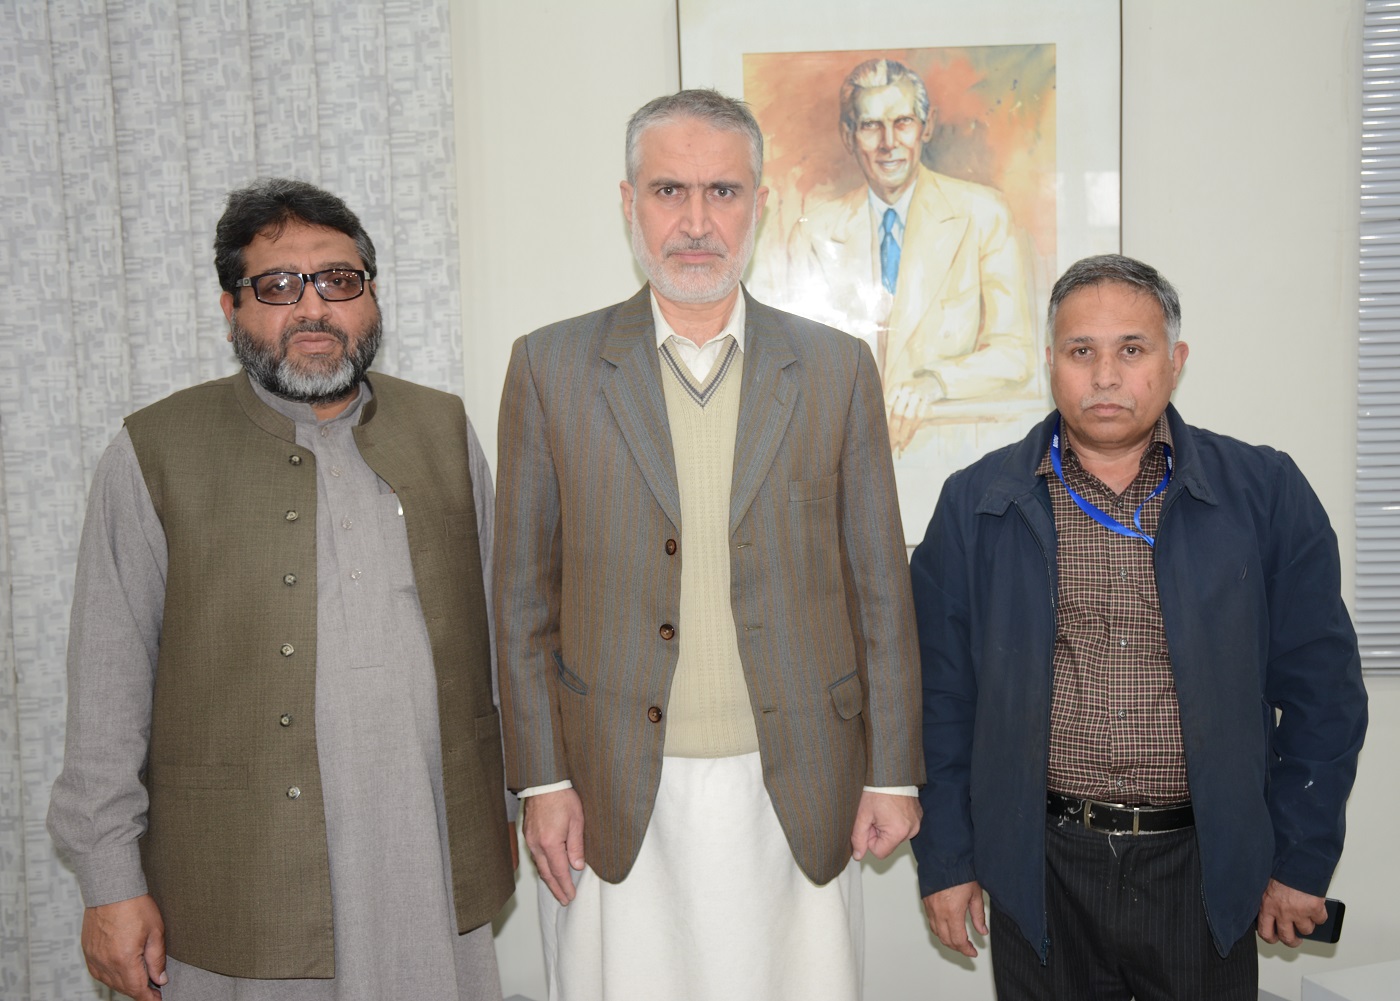 The Pro-Vice Chancellor Prof. Dr. Muhammad Abid in a group photo with Dr. Muhammad Daud Khattak, Regional Director AIOU and Prof. Dr. Muhammad Rauf at UoP